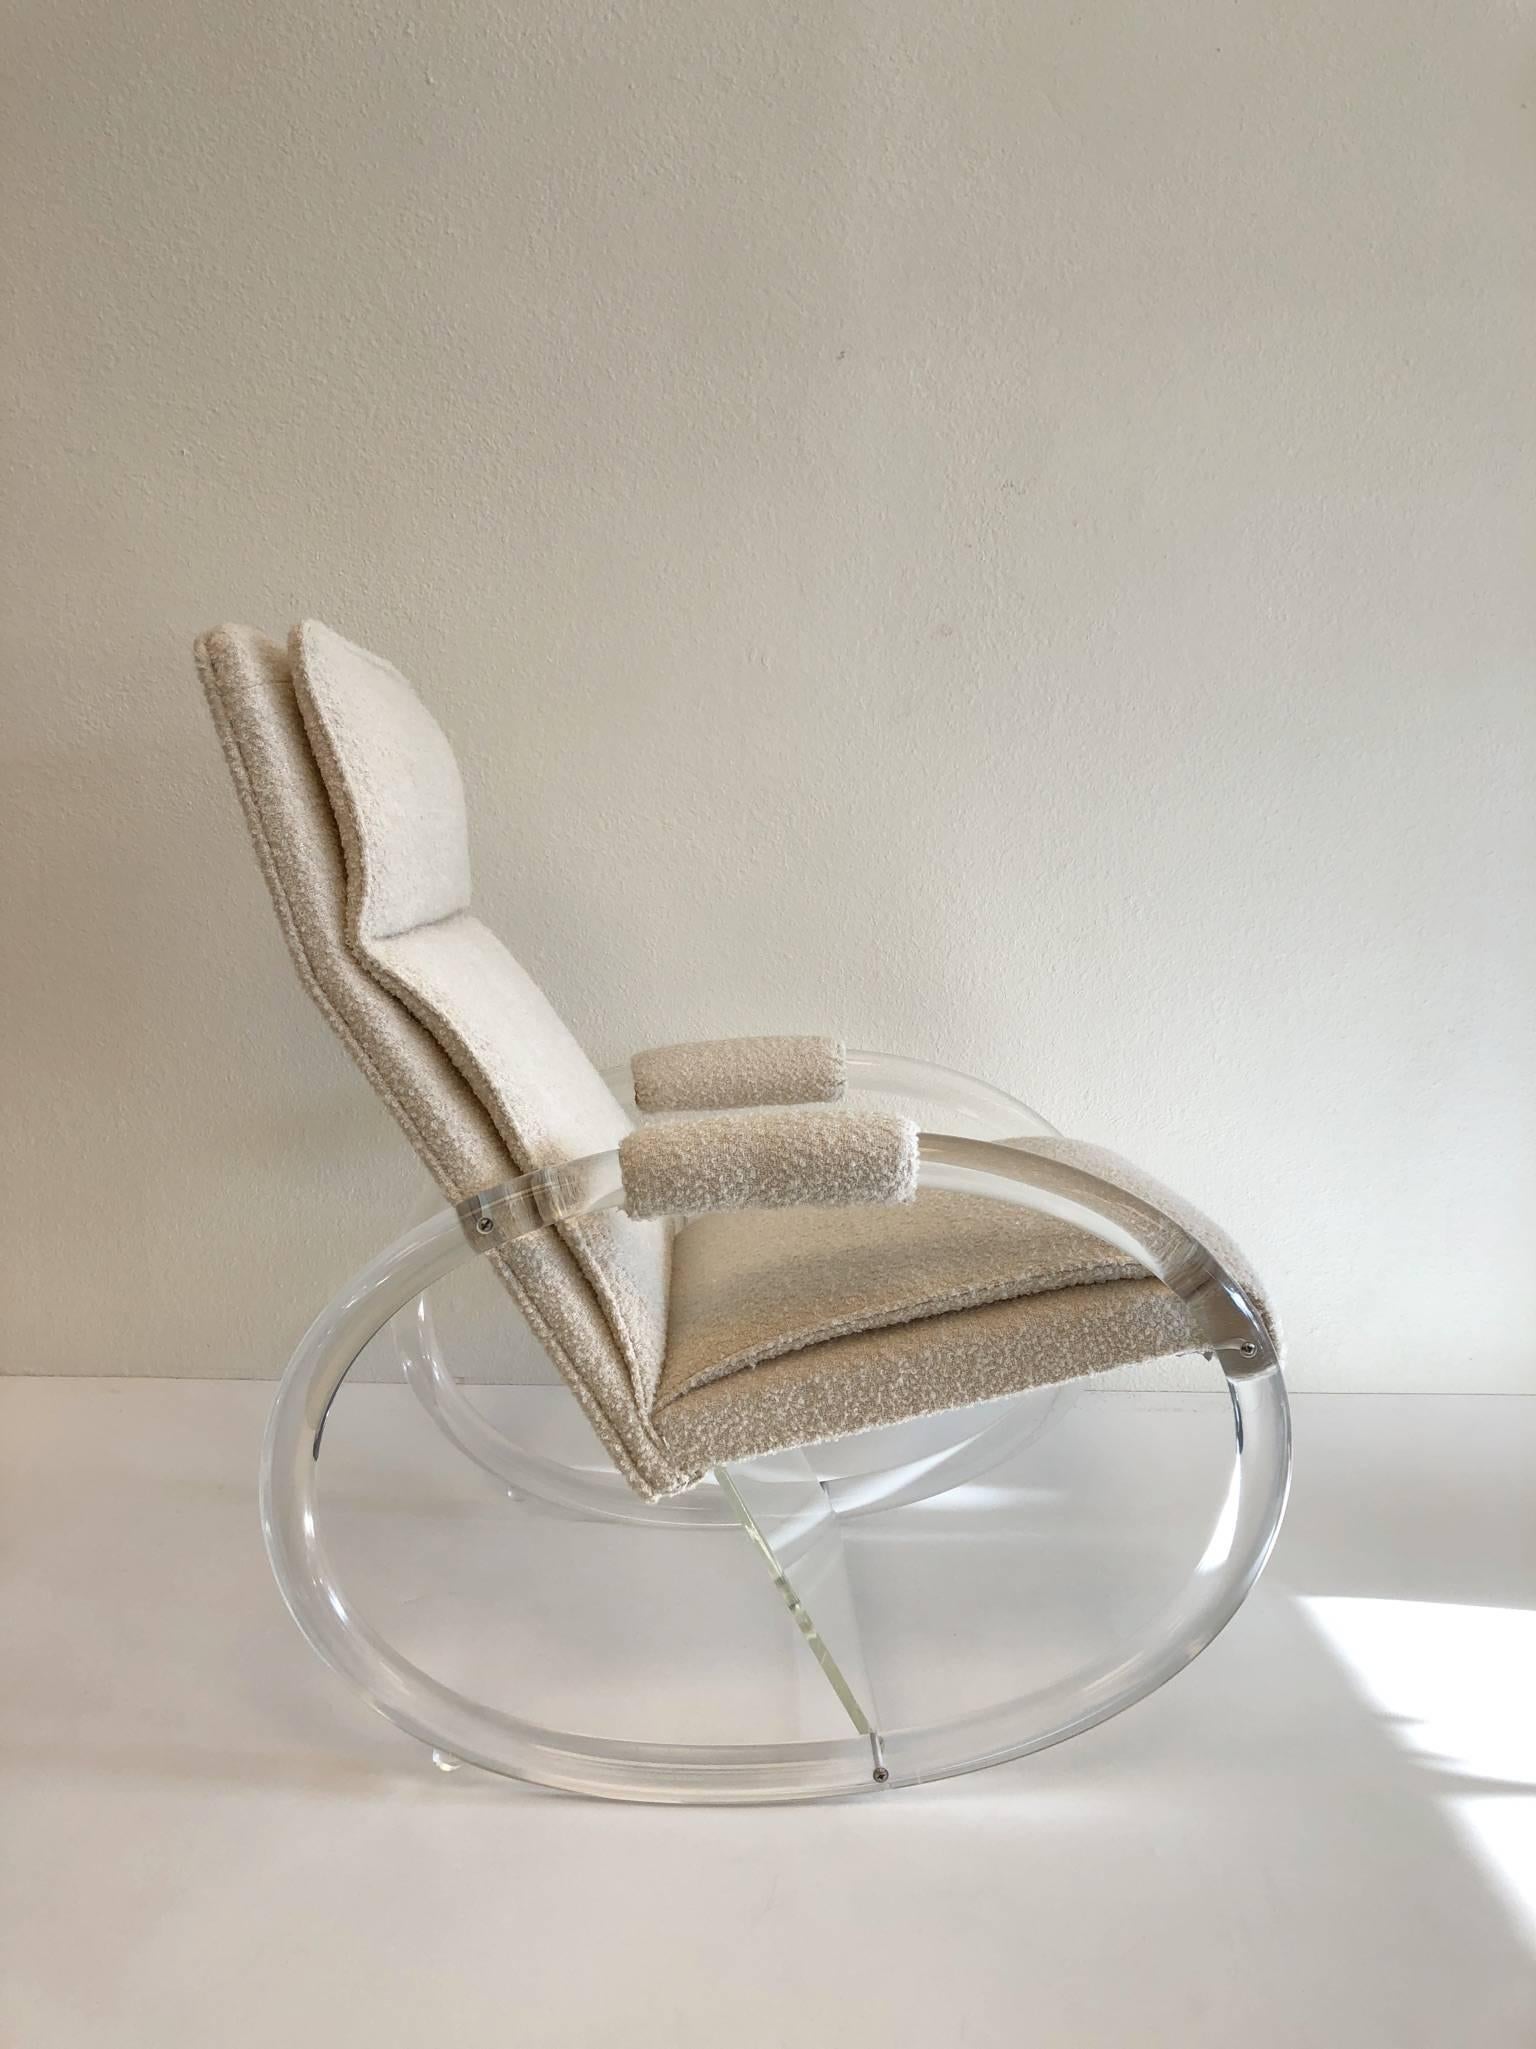 A glamorous clear Lucite and fabric rocking chair. The chair was designed in the 1970s by renowned designer Charles Hollis Jones. Newly reupholstered with an off-white thick soft nubby fabric.
Dimensions: 36” high, 18.5” seat, 36” deep and 25” wide.